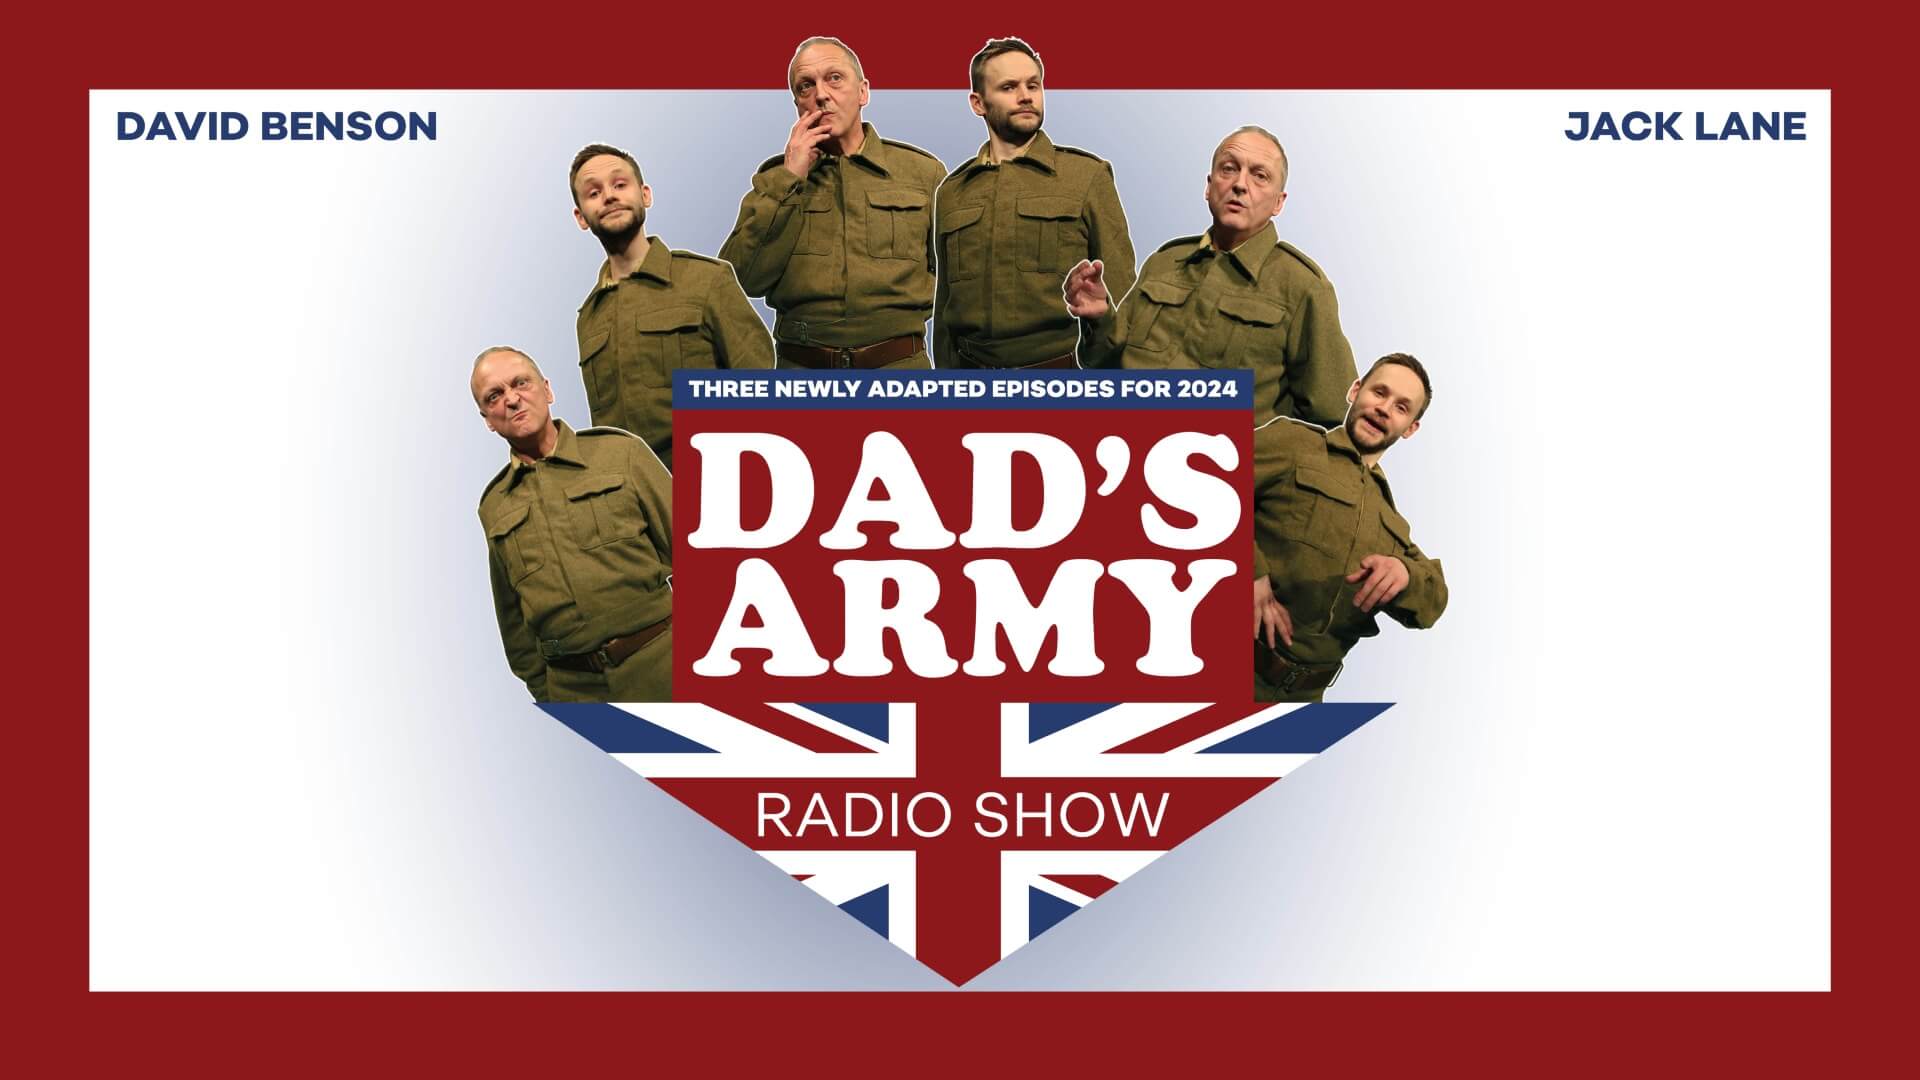 The Dad's Army Radio Show